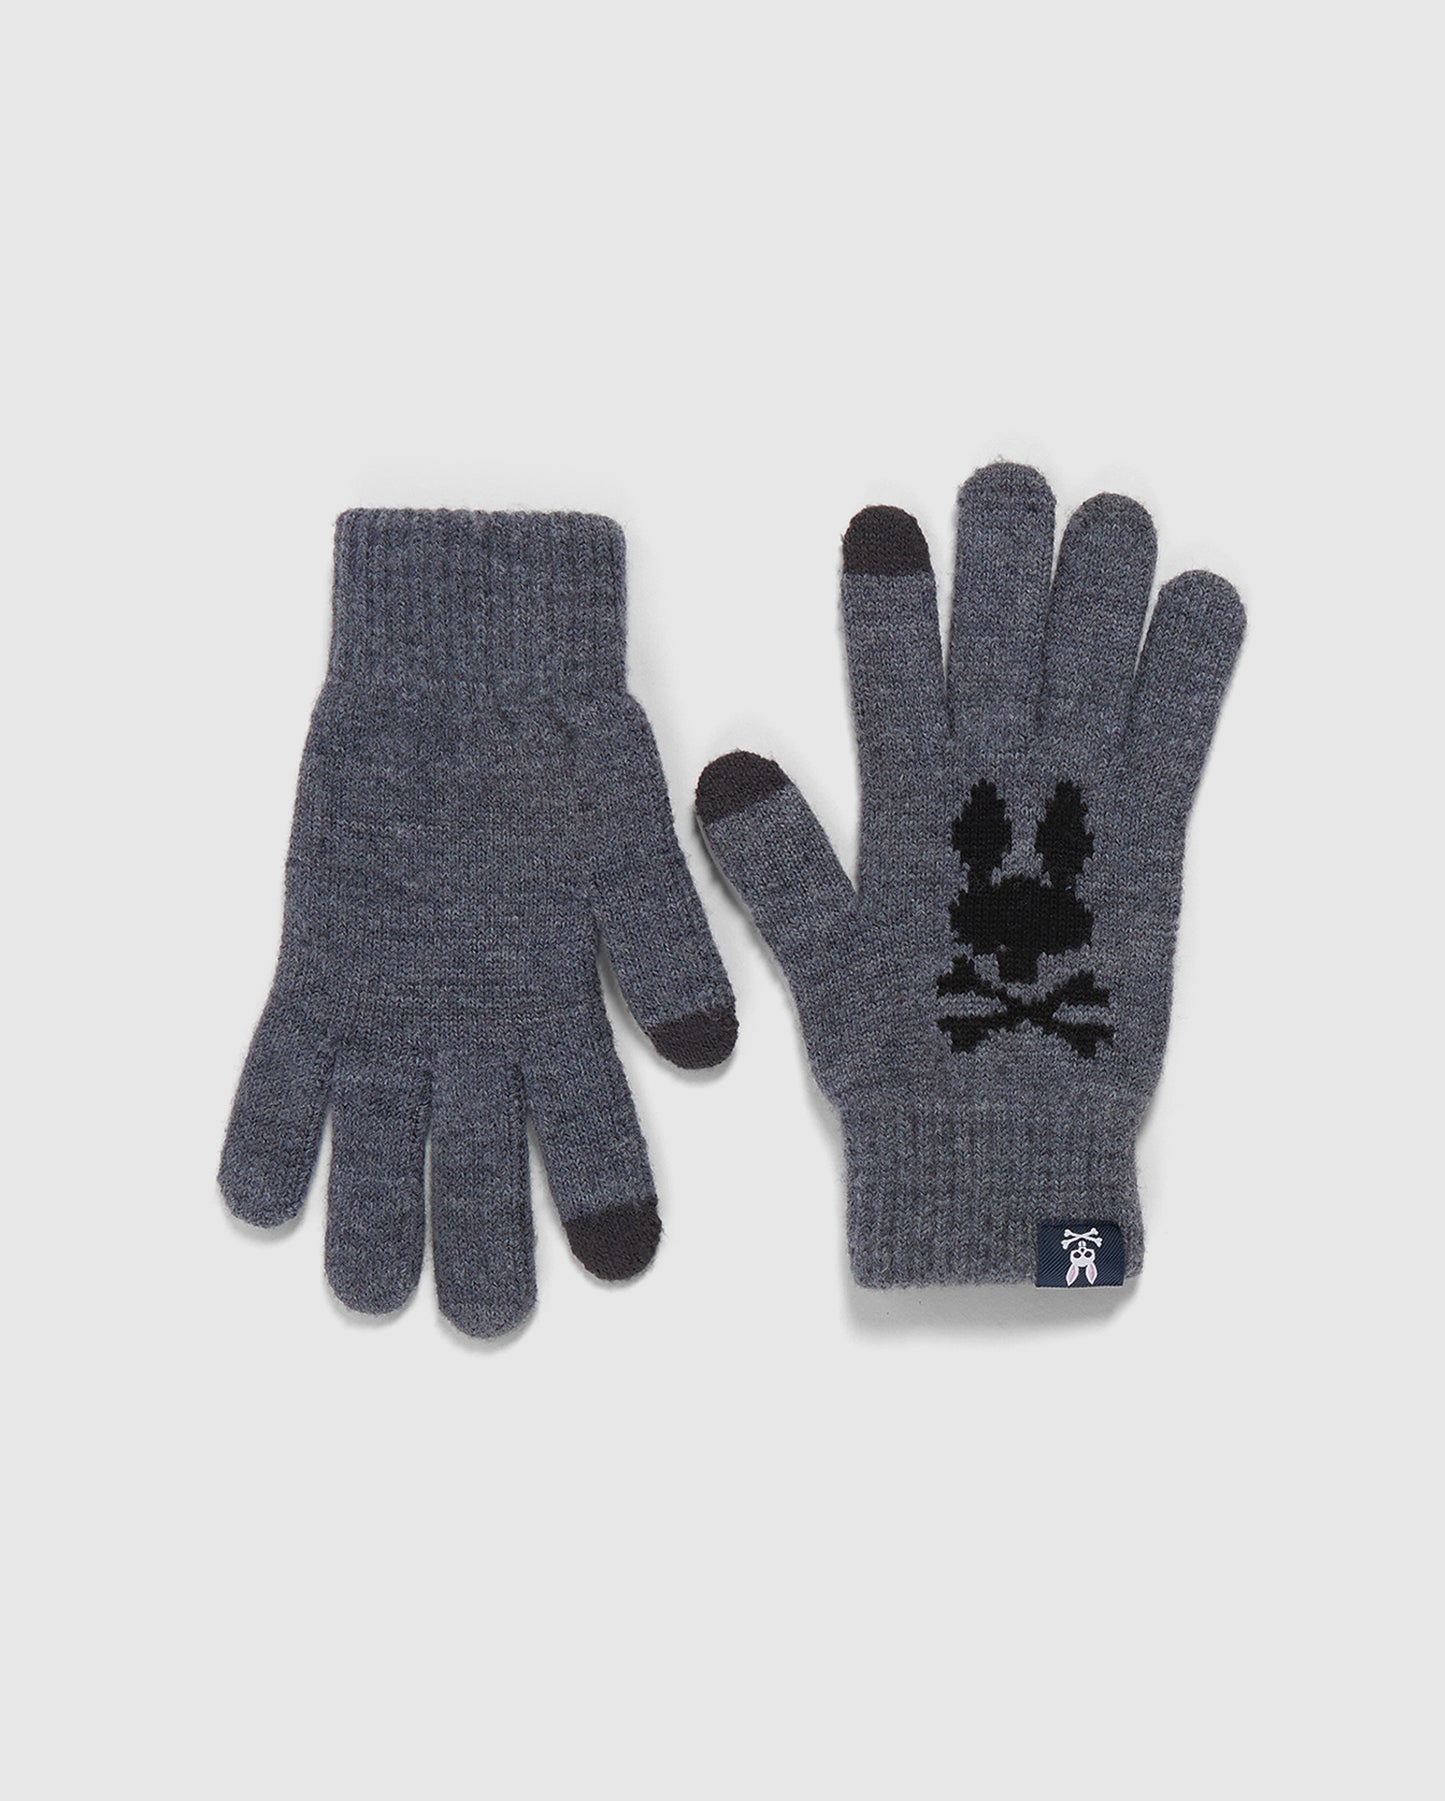 MENS WOOL GLOVES WITH GREY B6A998U1GL FINGER TOUCH